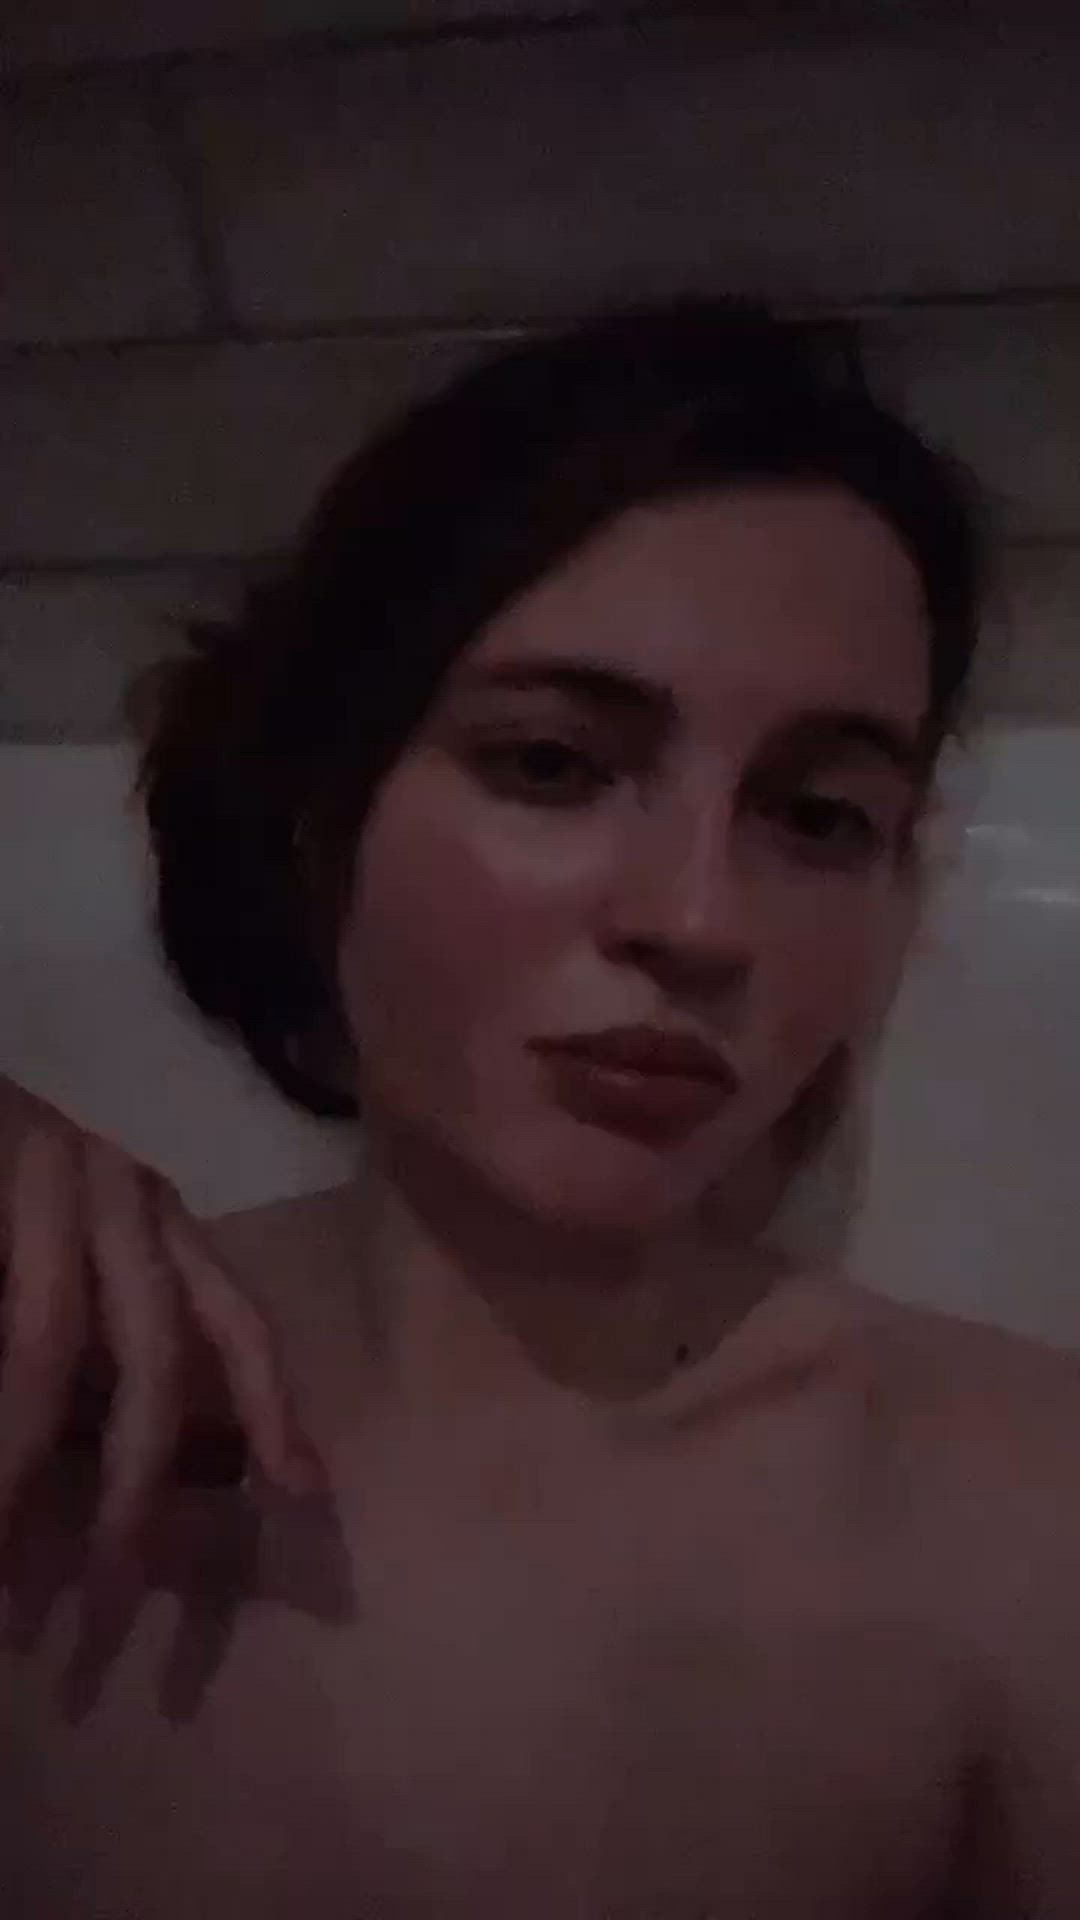 Boobs porn video with onlyfans model feliciavina <strong>@felicia_baby</strong>